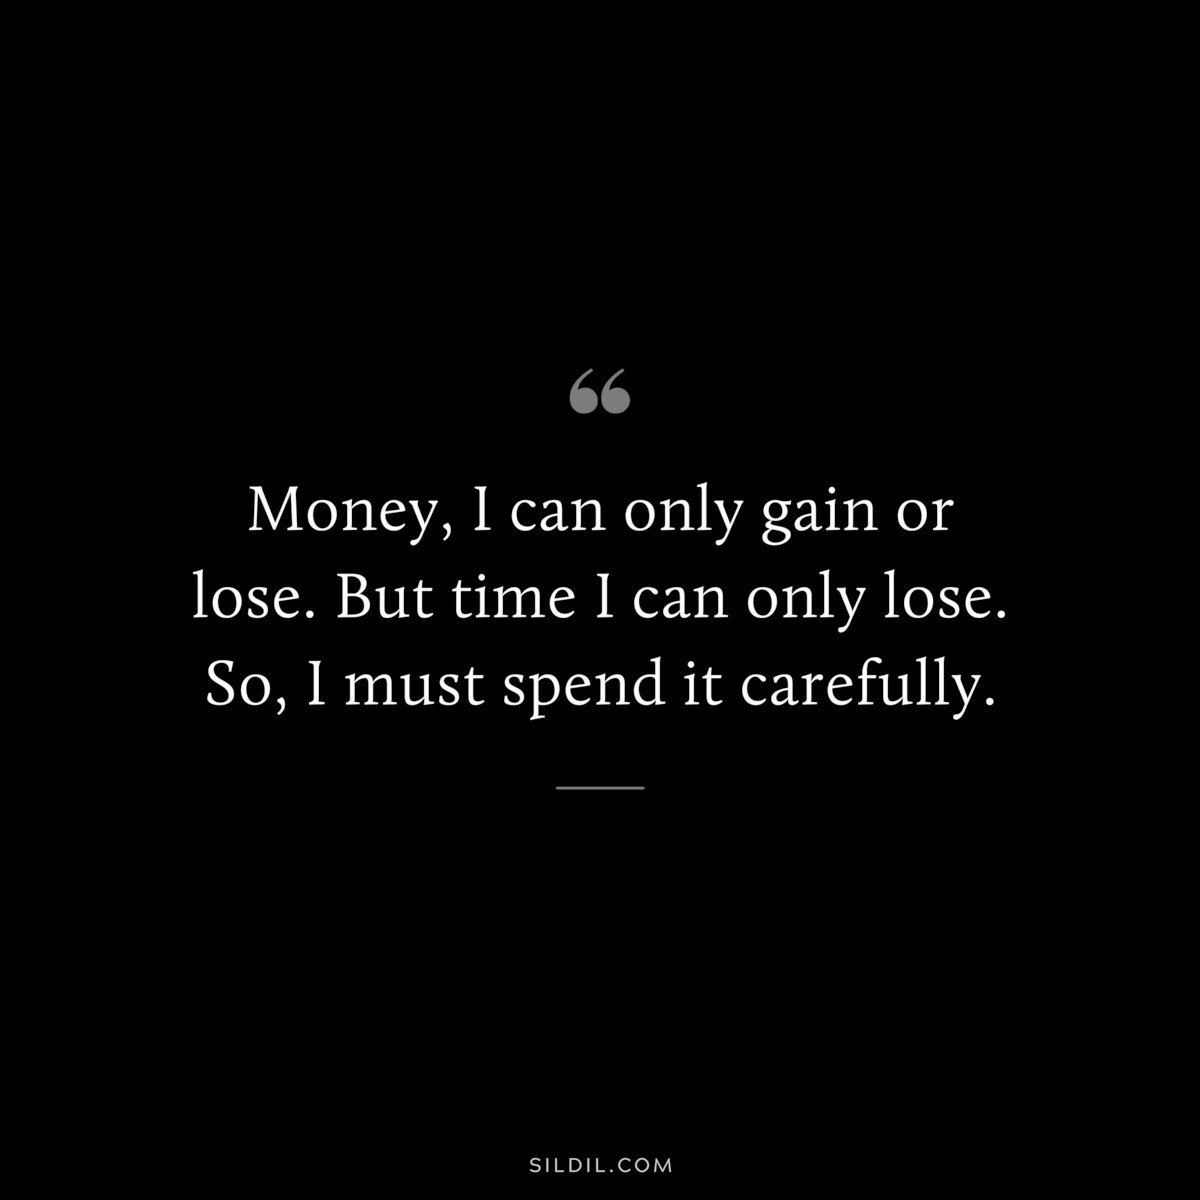 Money, I can only gain or lose. But time I can only lose. So, I must spend it carefully.